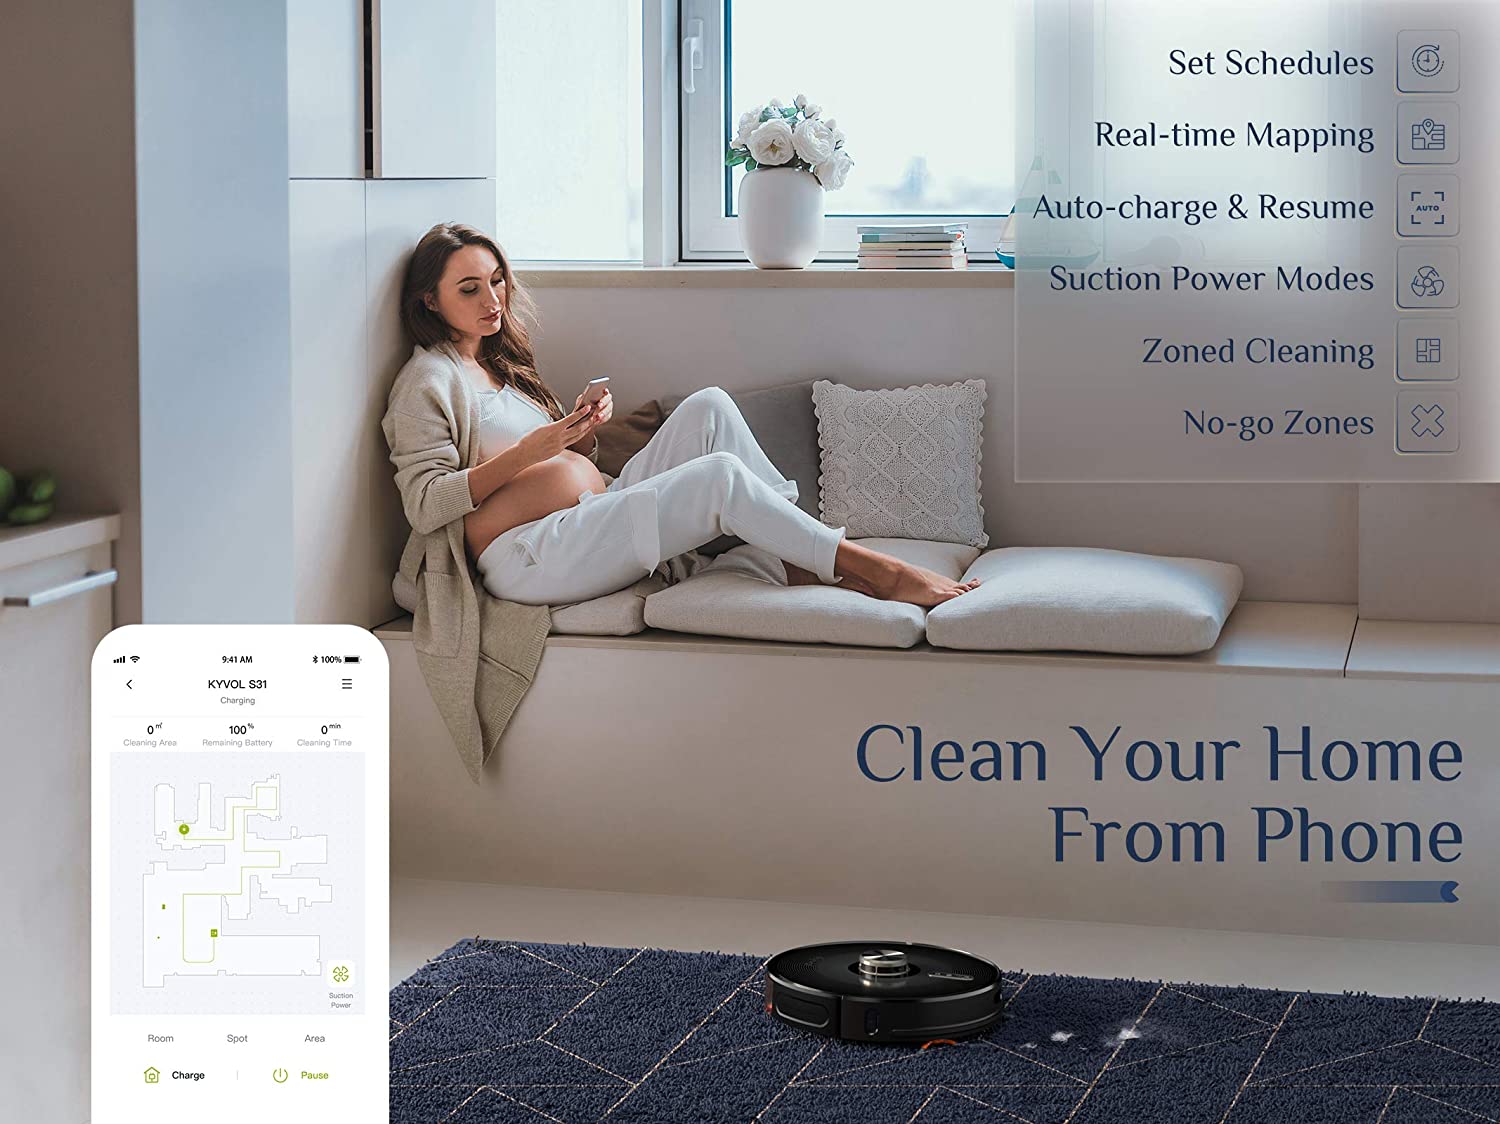 Kyvol Cybovac S31 Robot Vacuum and Mop, Automatic Dirt Disposal, Lidar Navigation, 3000Pa Suction Robotic Vacuum Cleaner with Mapping, 240 mins Runtime, Works with Alexa, Ideal for Pet Hair, Carpets - image 5 of 8